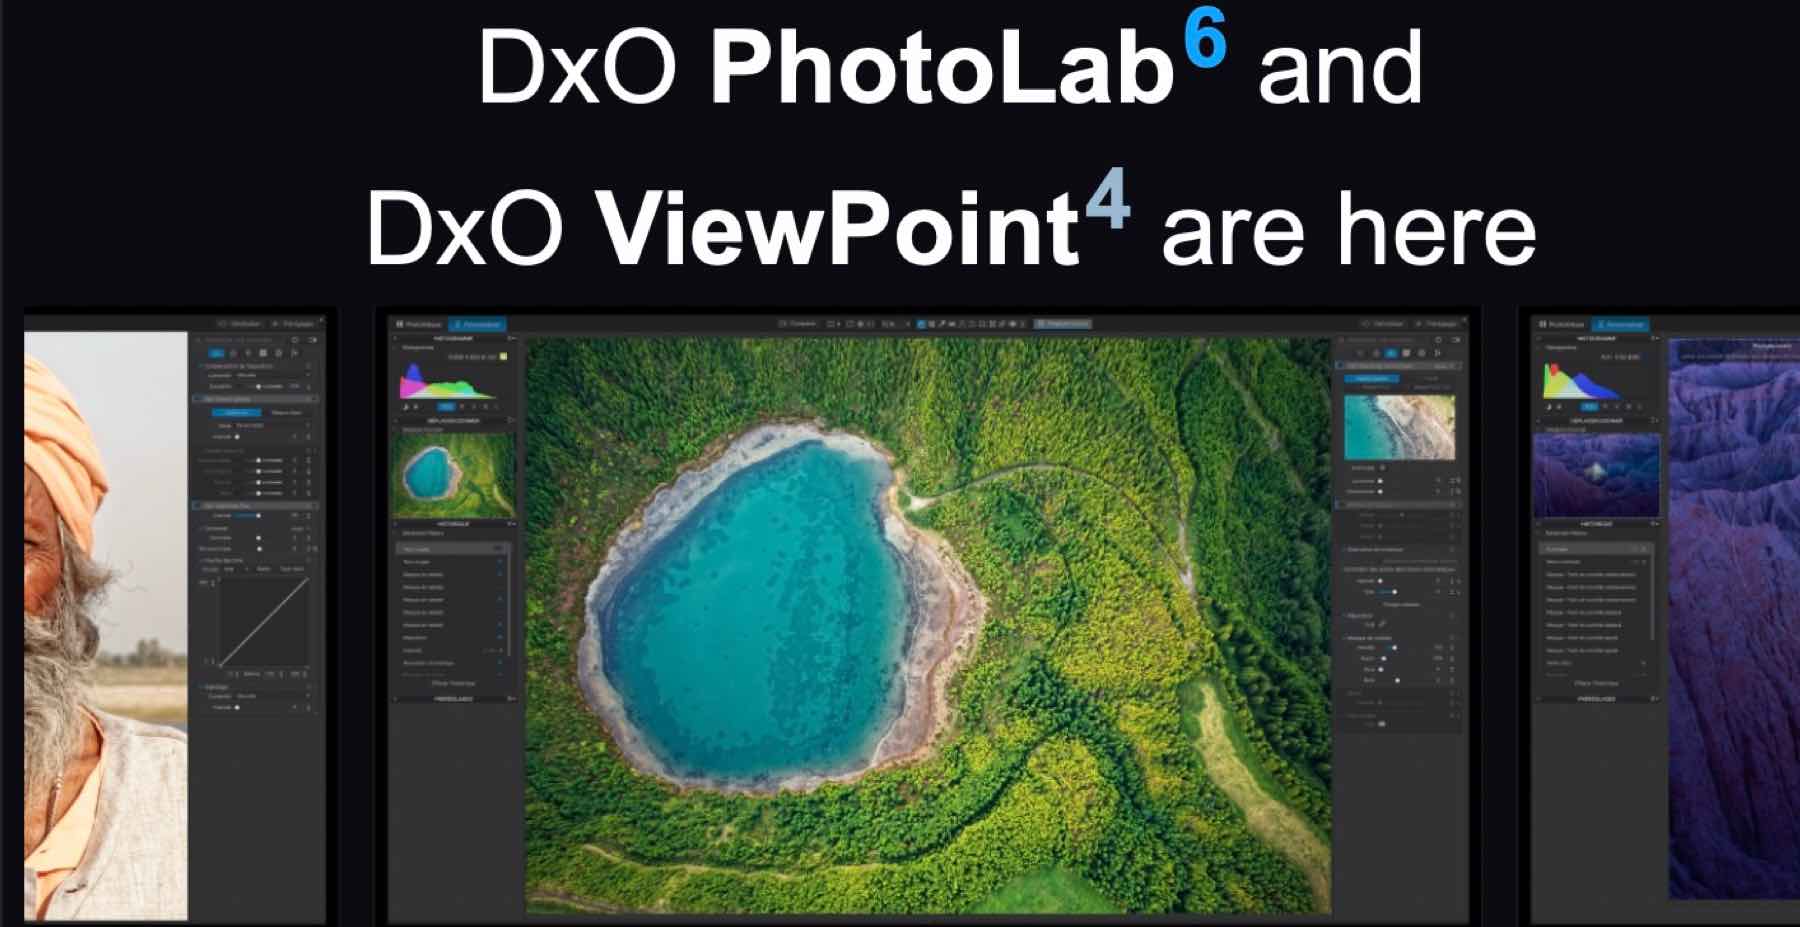 download the last version for iphoneDxO ViewPoint 4.10.0.250